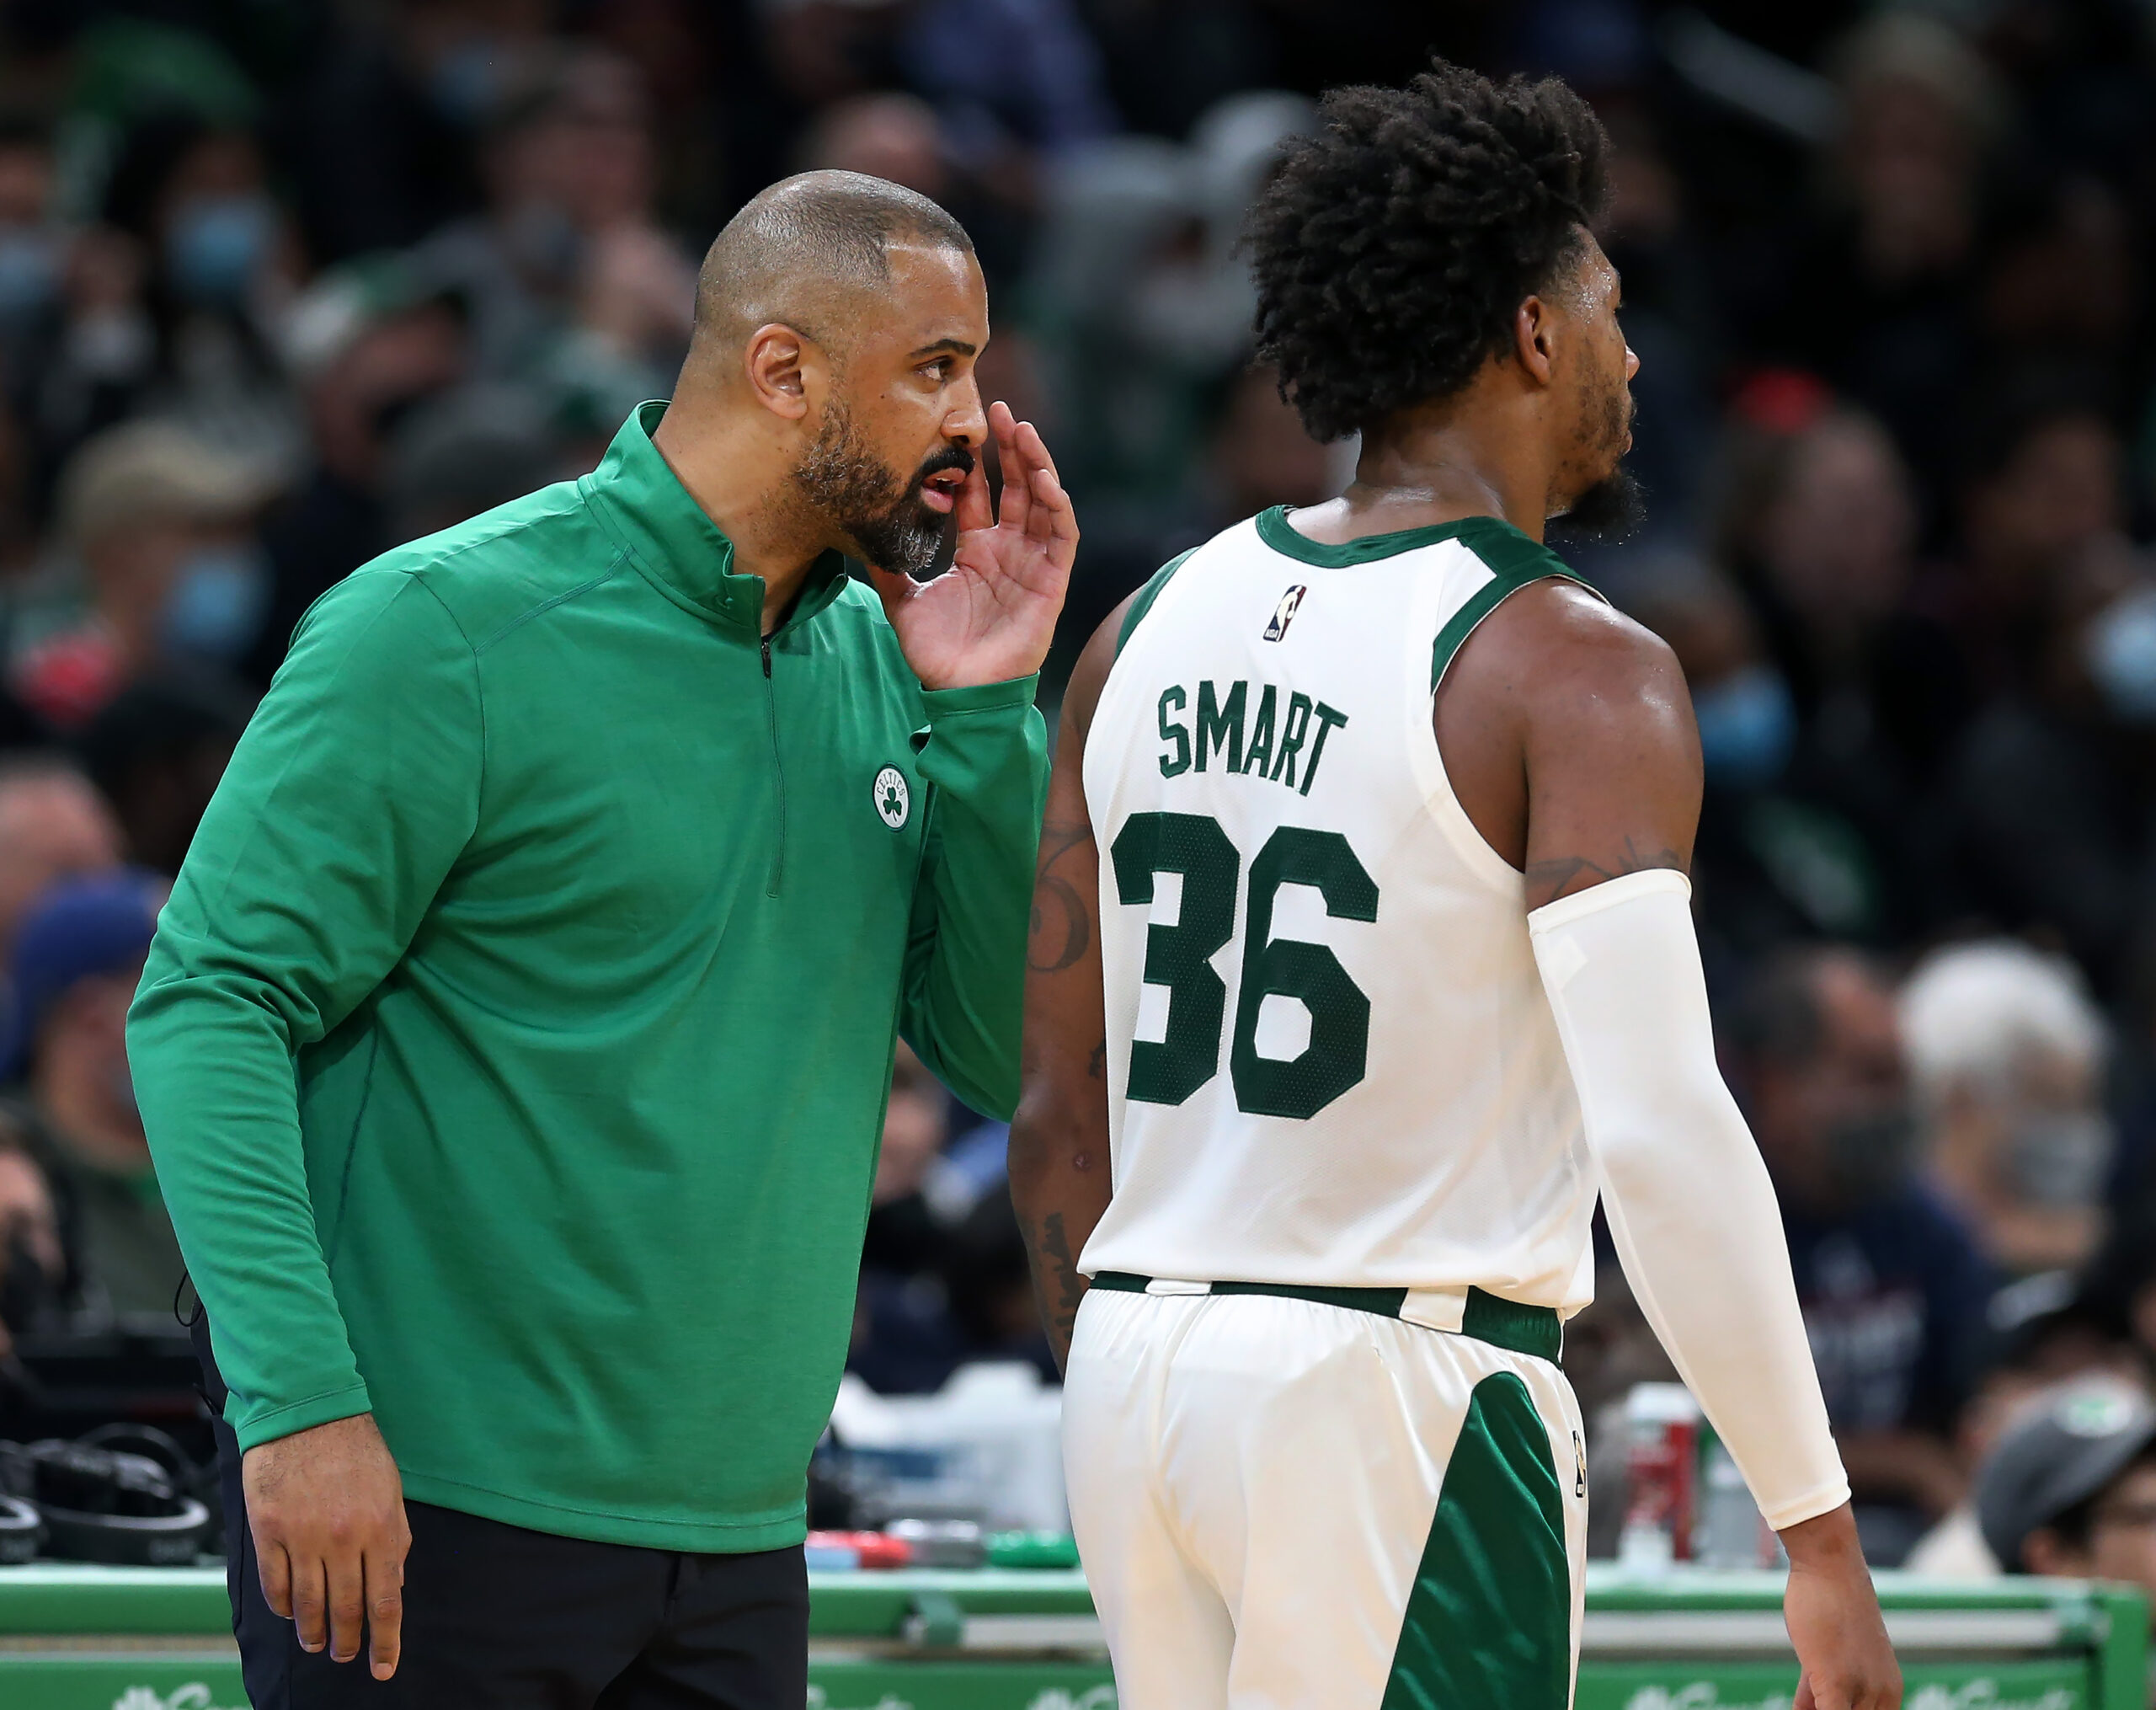 Jayson Tatum has been criticized for his performance against the